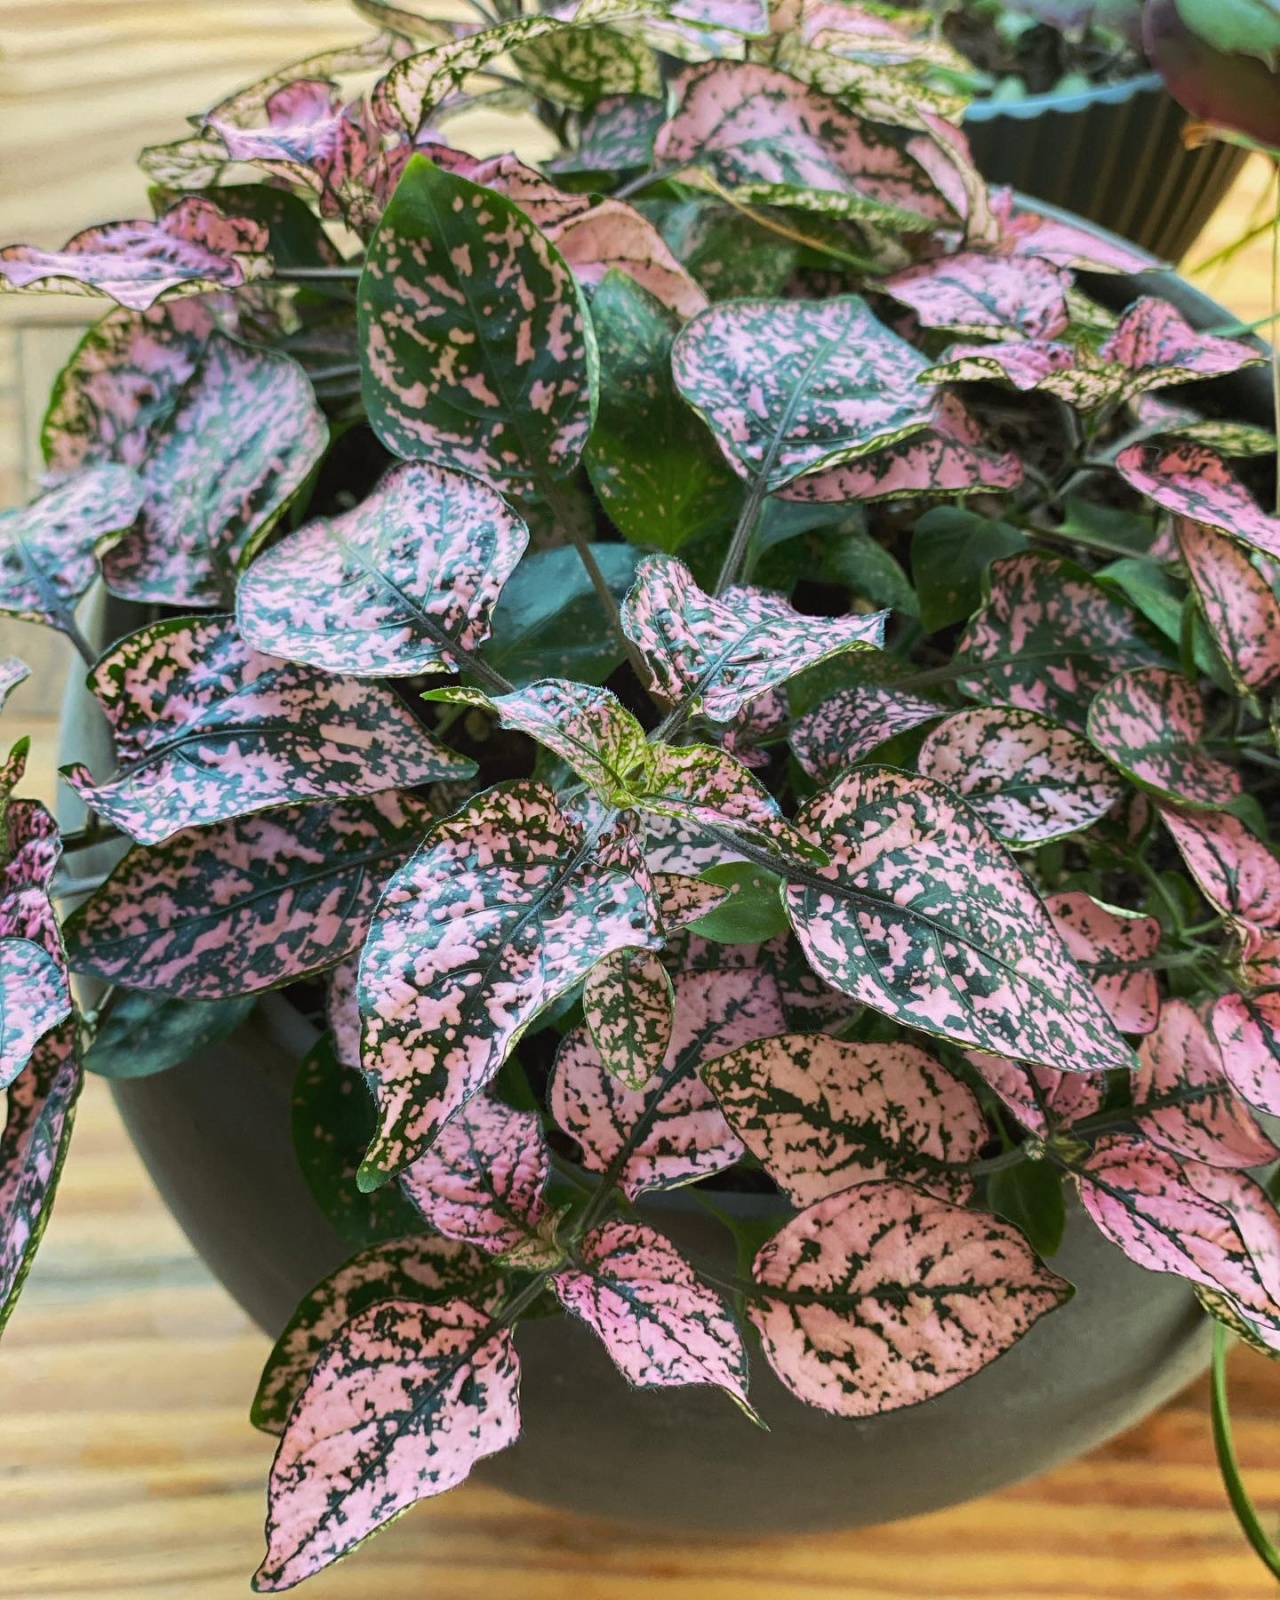 my top 5 tips for keeping houseplants alive (and thriving)